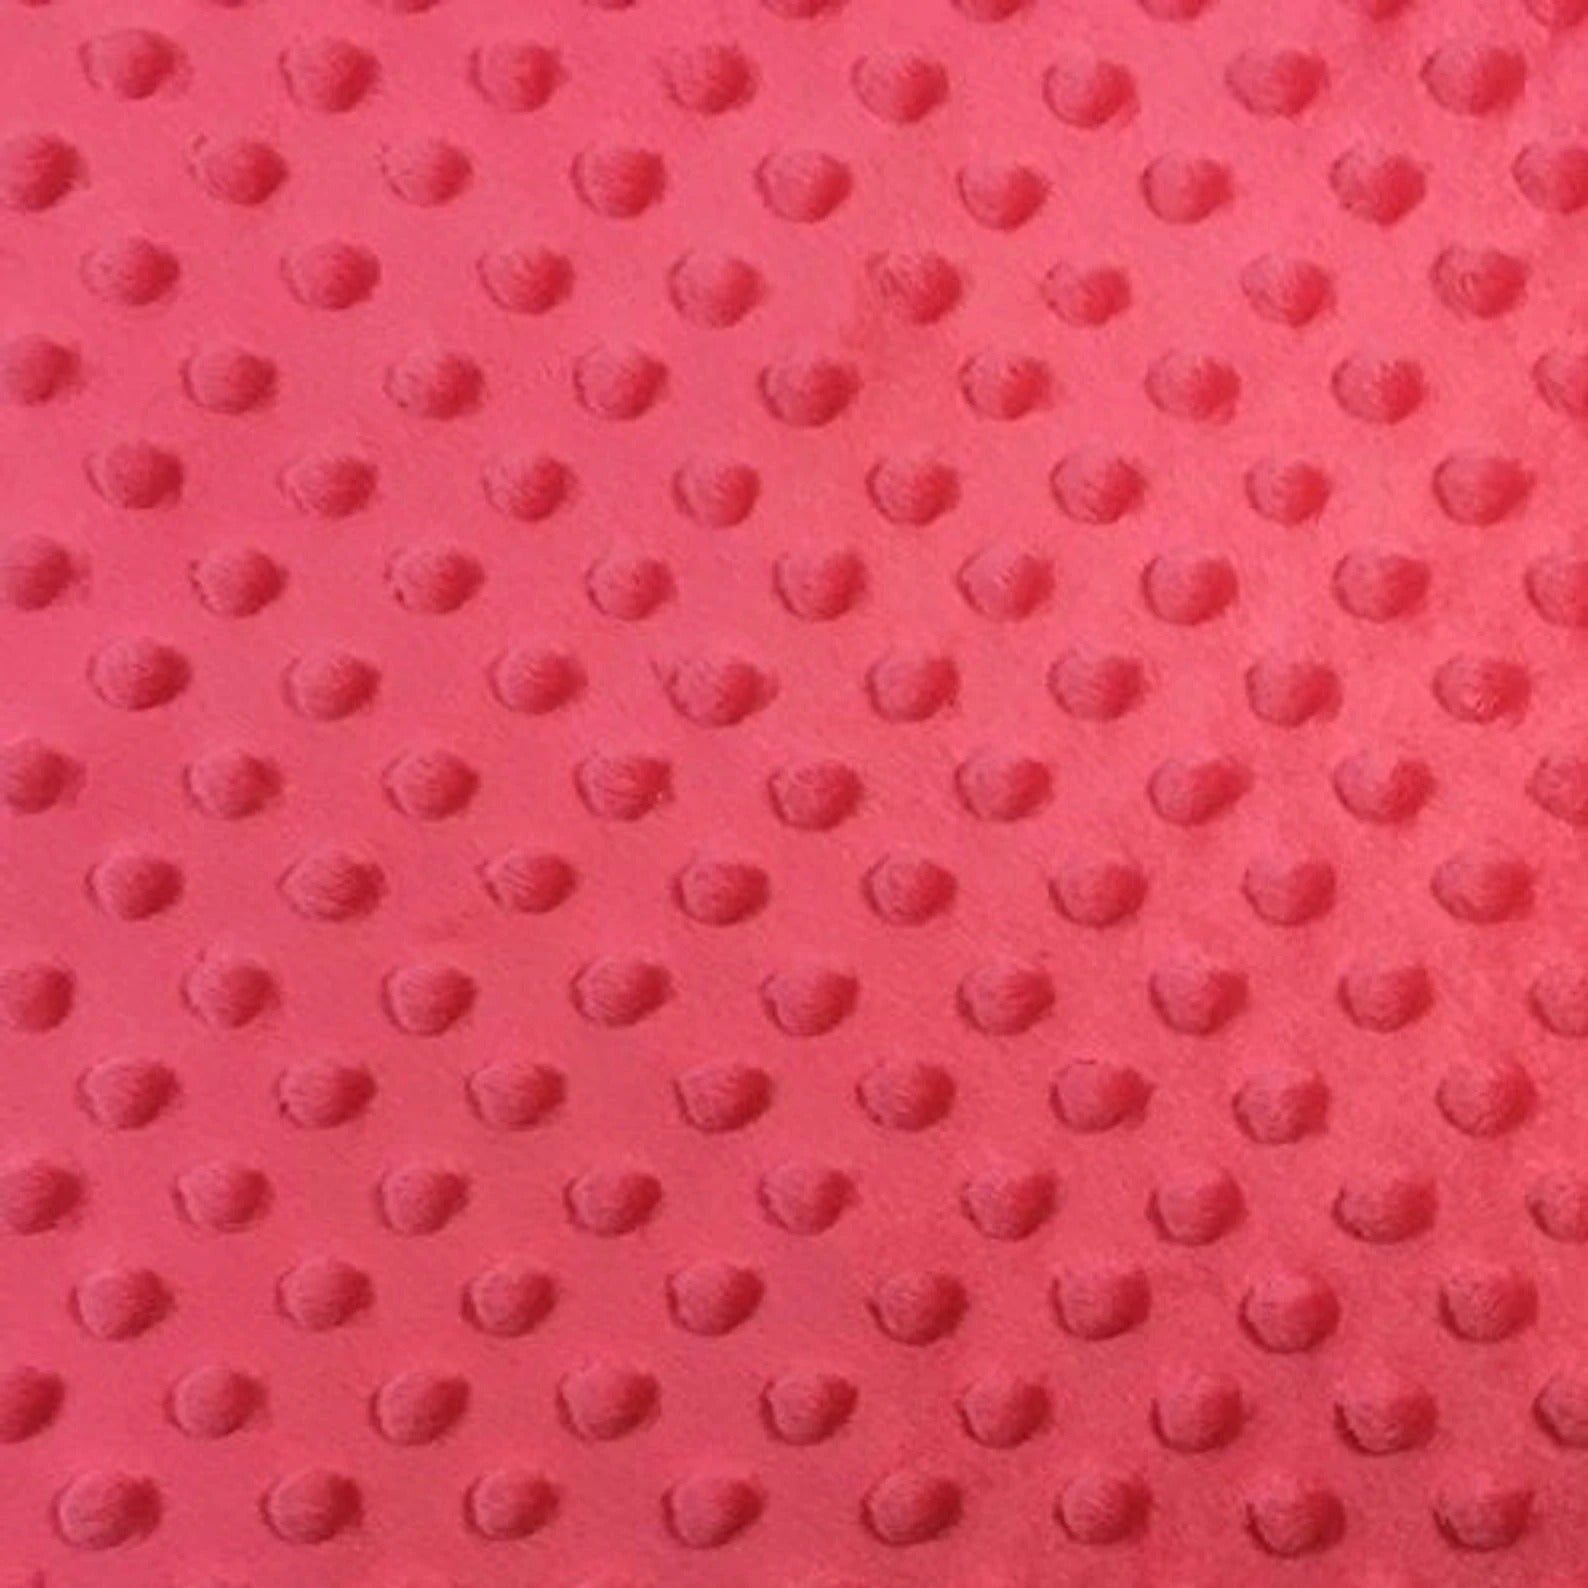 Bubble Polka Dot Minky Fabric By The Roll (20 Yards) Wholesale FabricMinkyICEFABRICICE FABRICSStrawberry PinkBy The Roll (60" Wide)Bubble Polka Dot Minky Fabric By The Roll (20 Yards) Wholesale Fabric ICEFABRIC Red